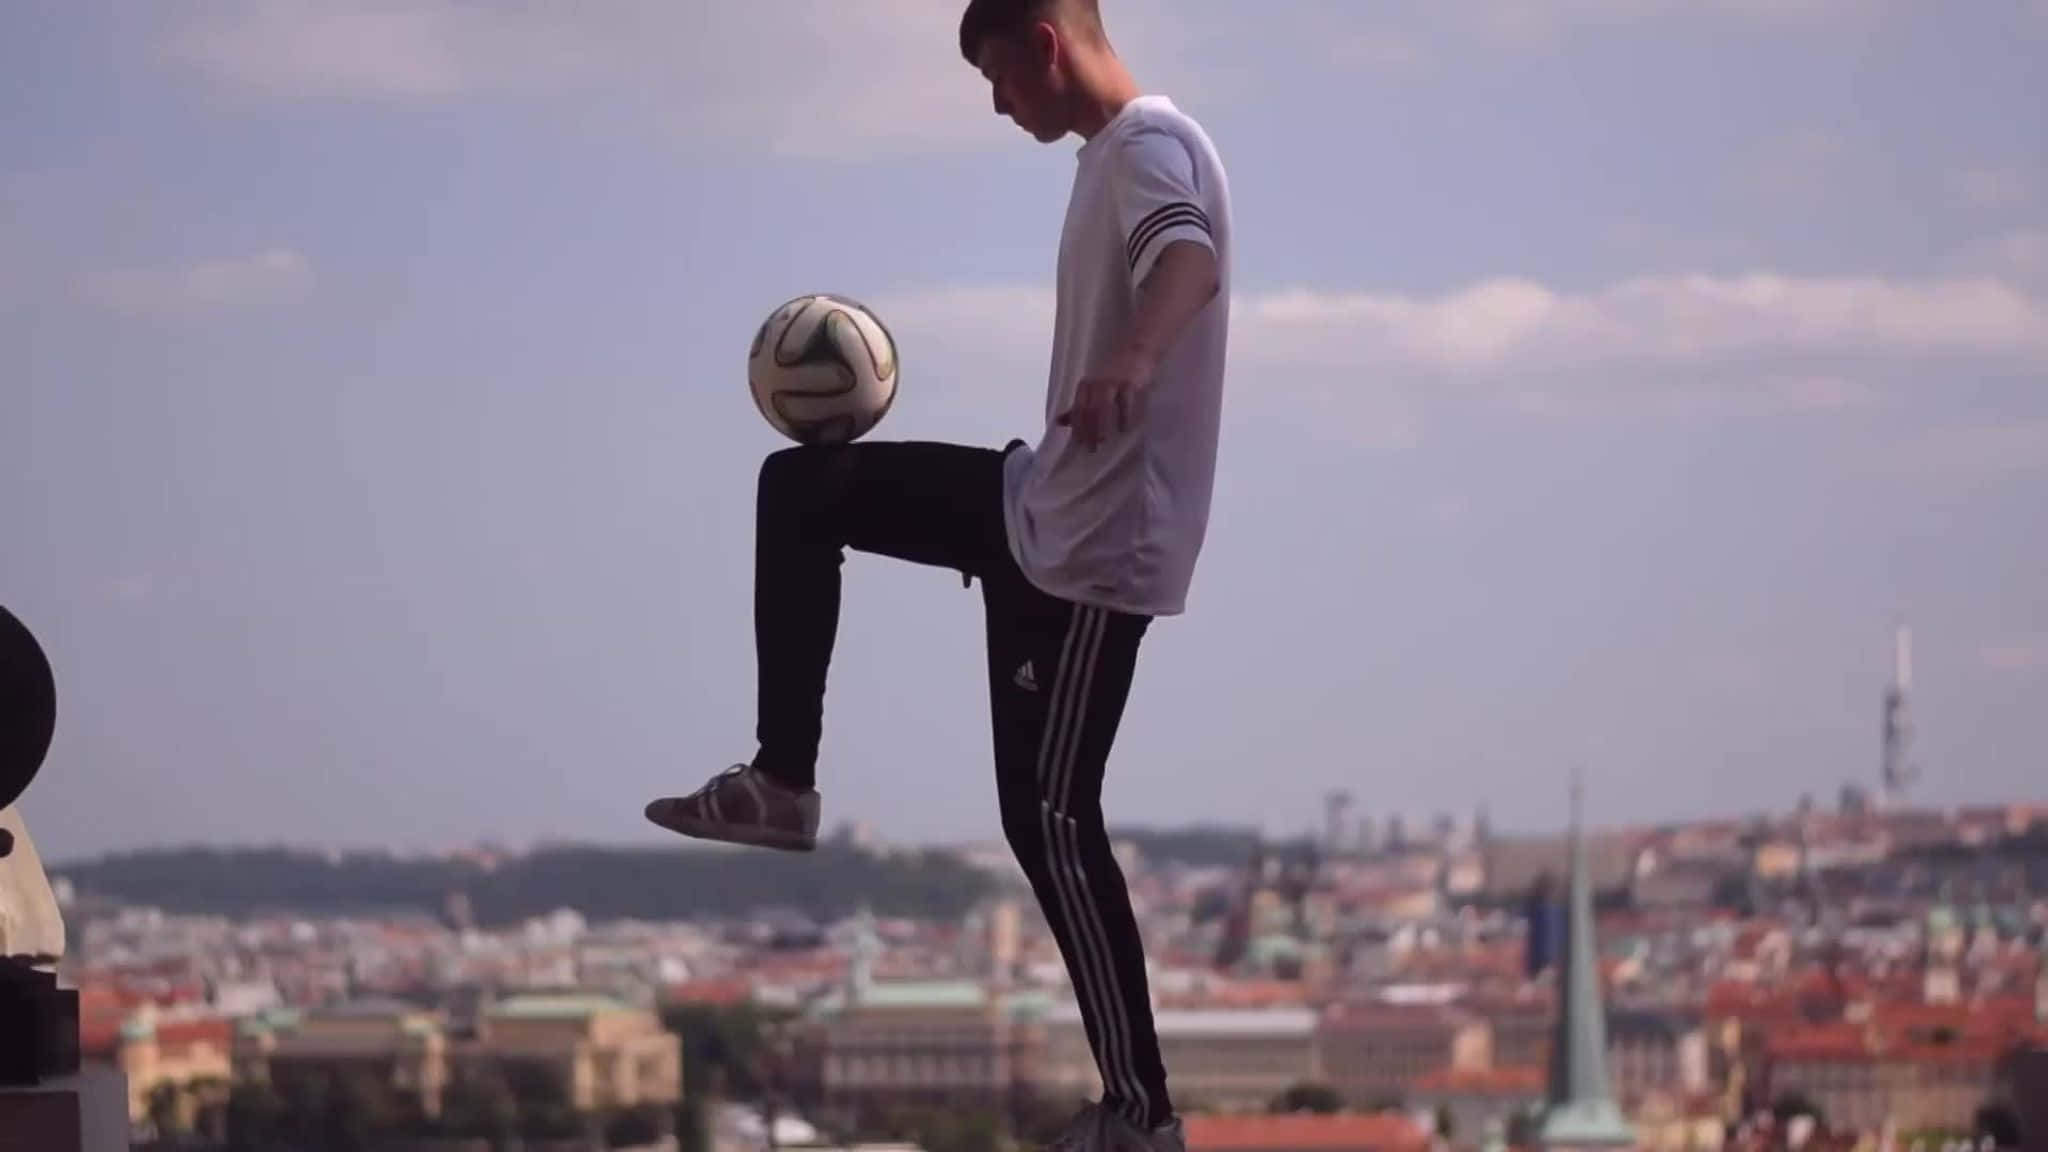 Exciting Freestyle Soccer Trick Performance Wallpaper